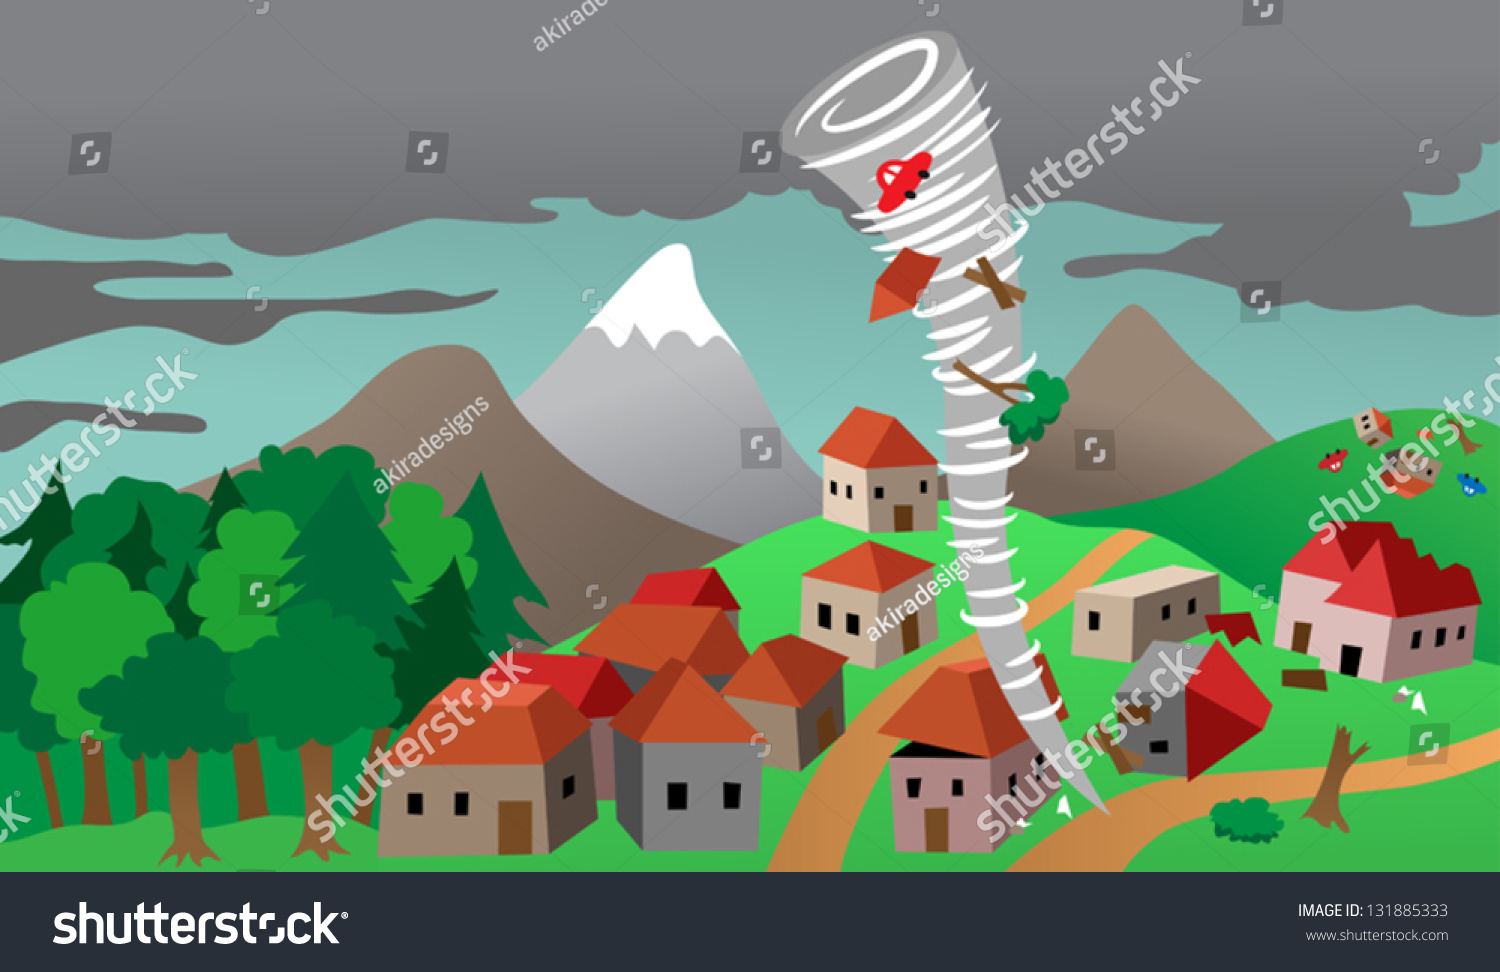 destroyed house clipart - photo #32